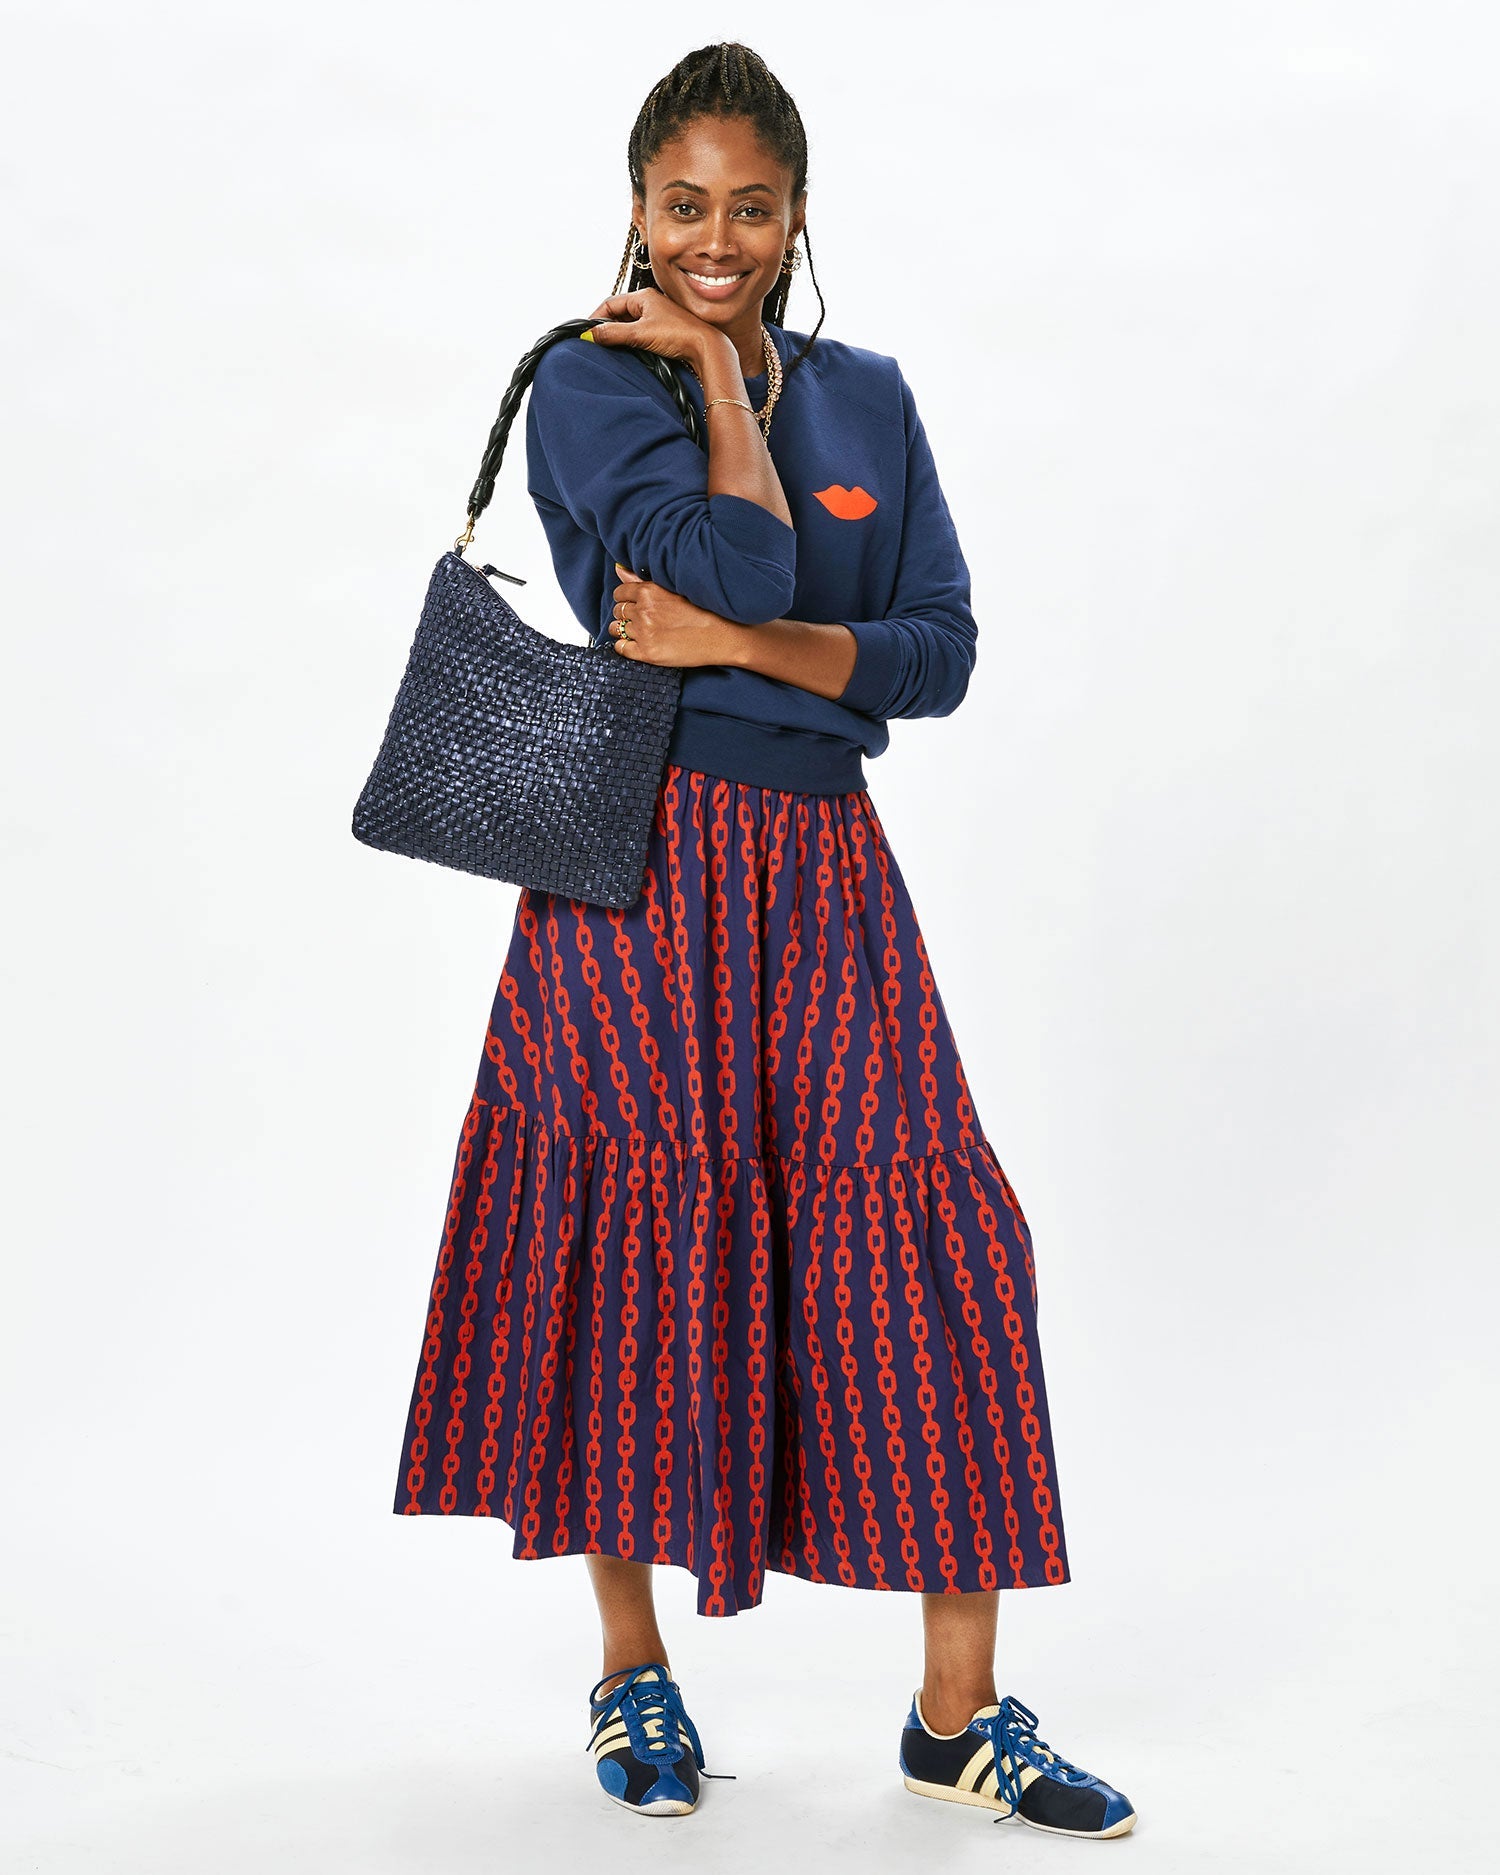 Mecca with the Twilight Foldover Clutch w/ Tabs on her shoulder in the Manon Skirt and the navy with lips sweatshirt